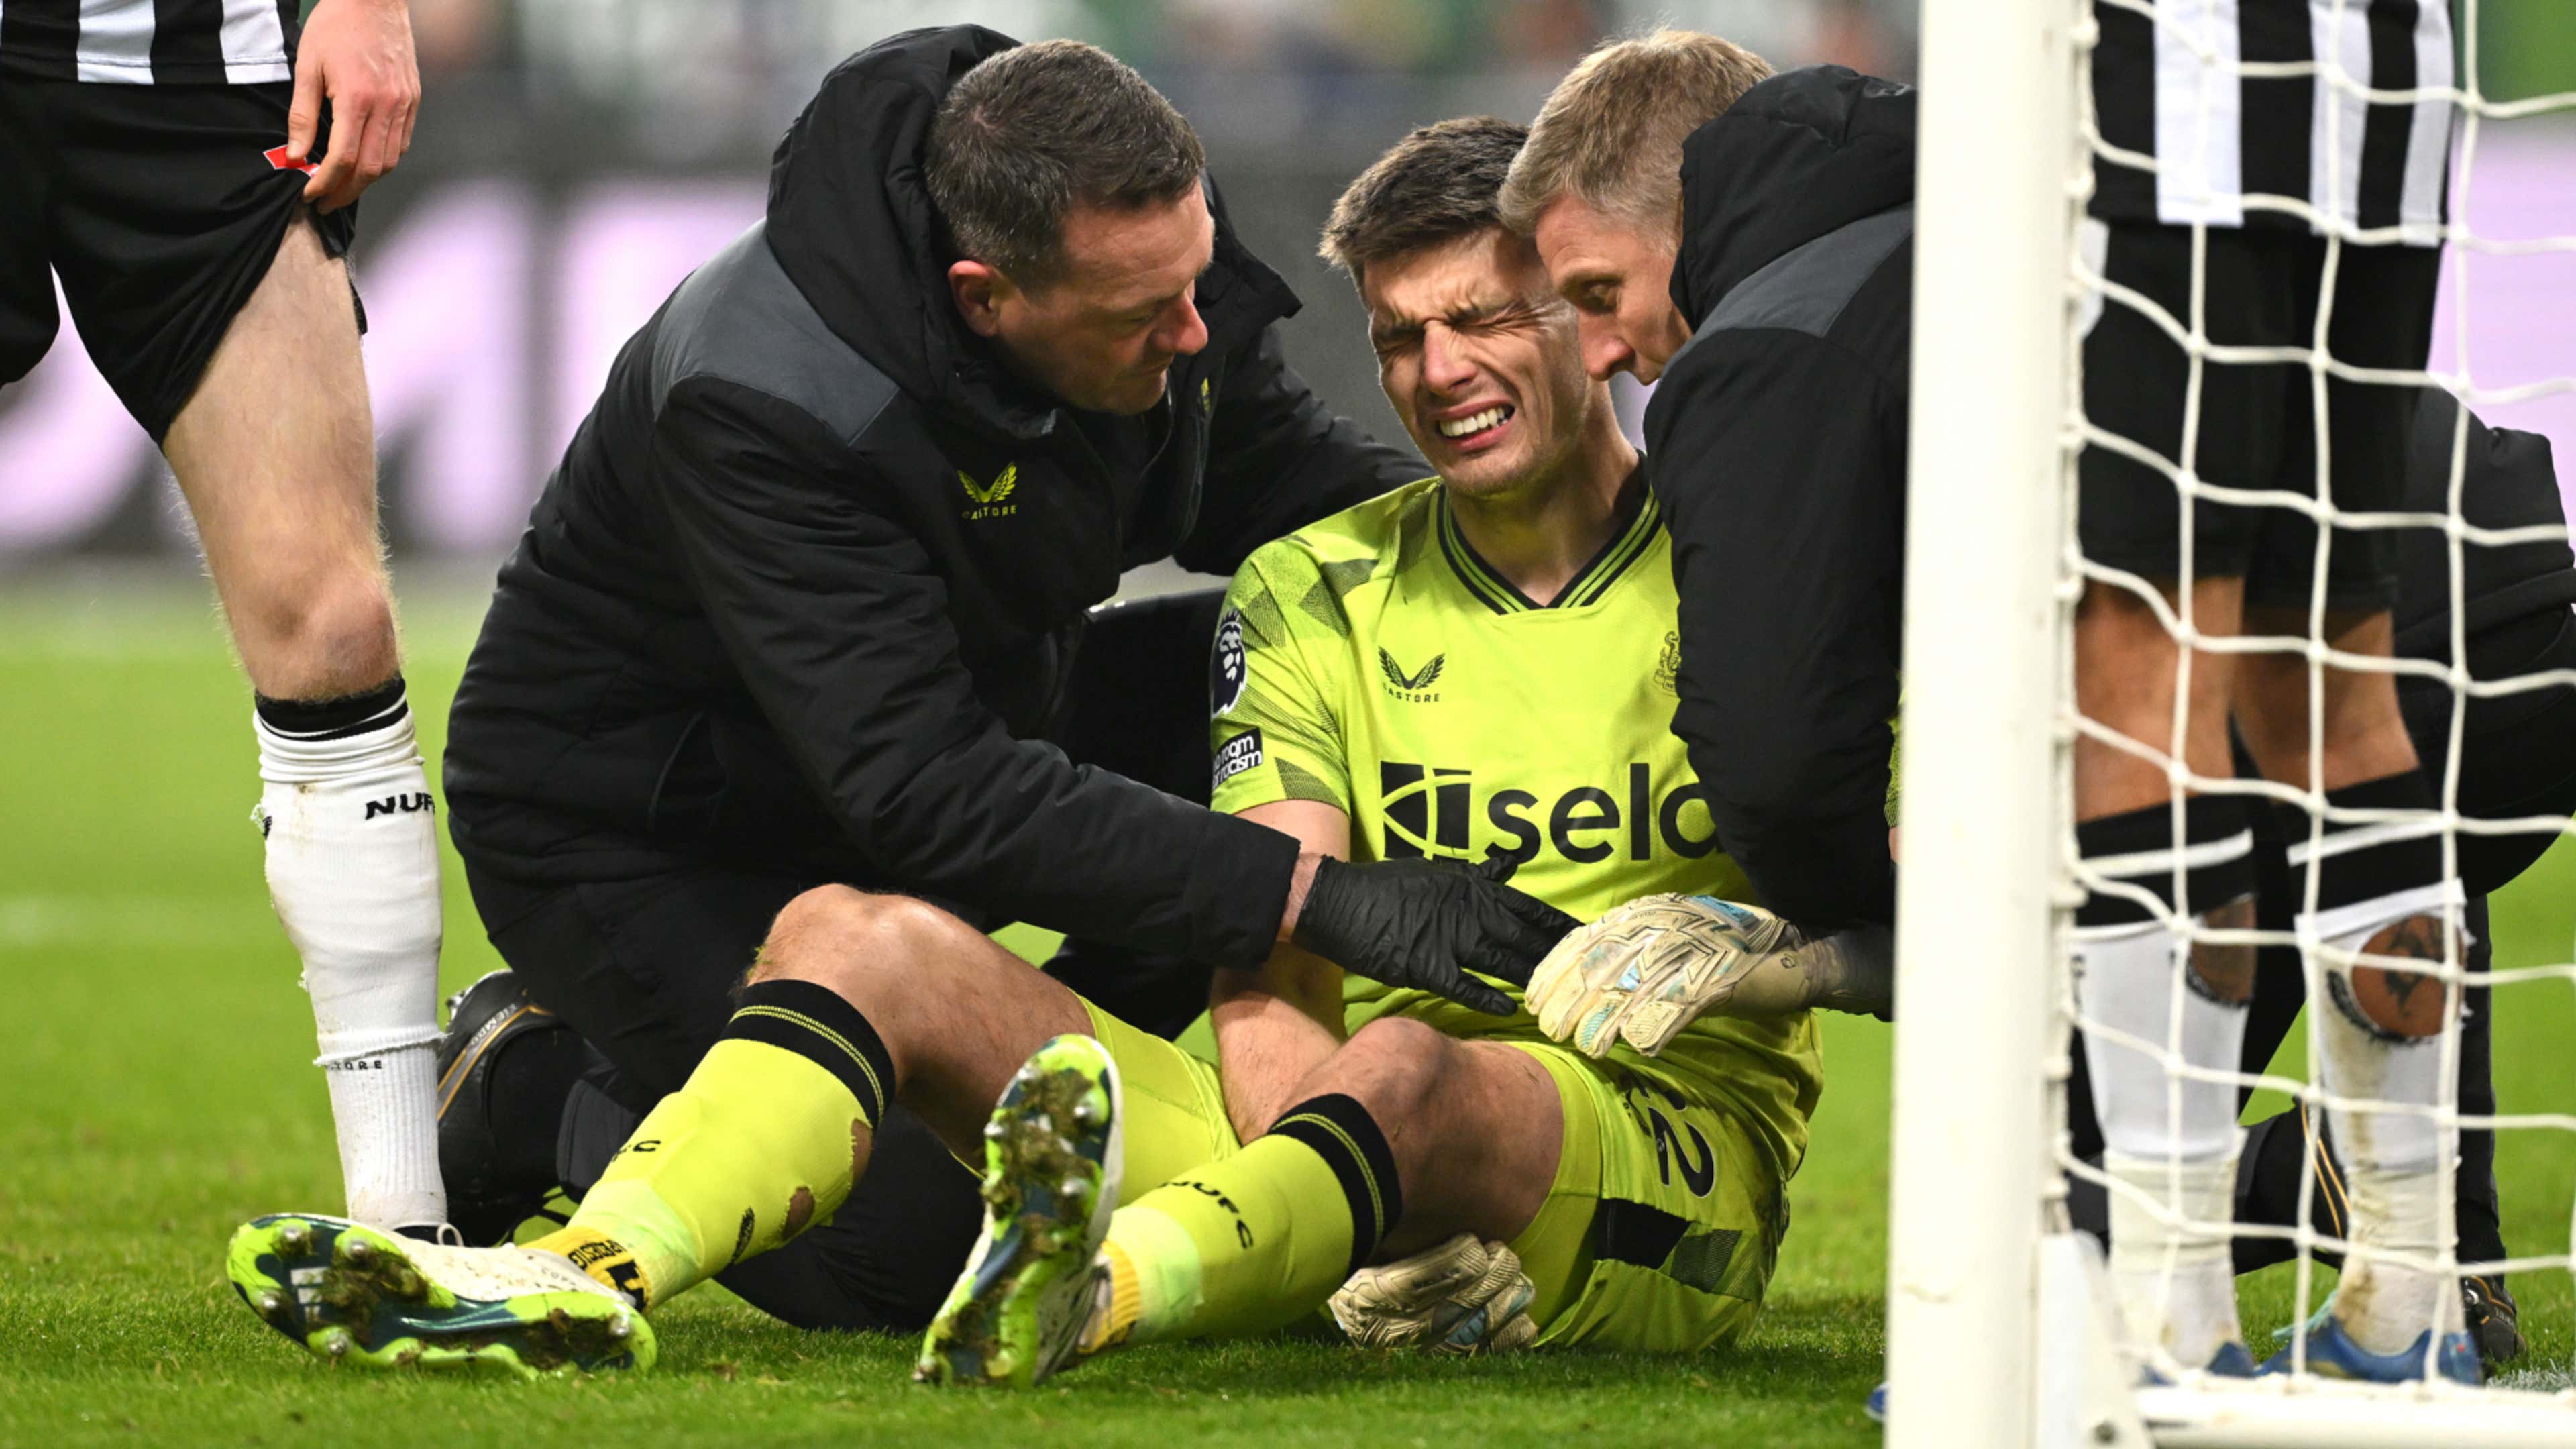 Nightmare for Newcastle! Goalkeeper Nick Pope facing five months on sidelines after suffering dislocated shoulder against Man Utd | Goal.com Nigeria